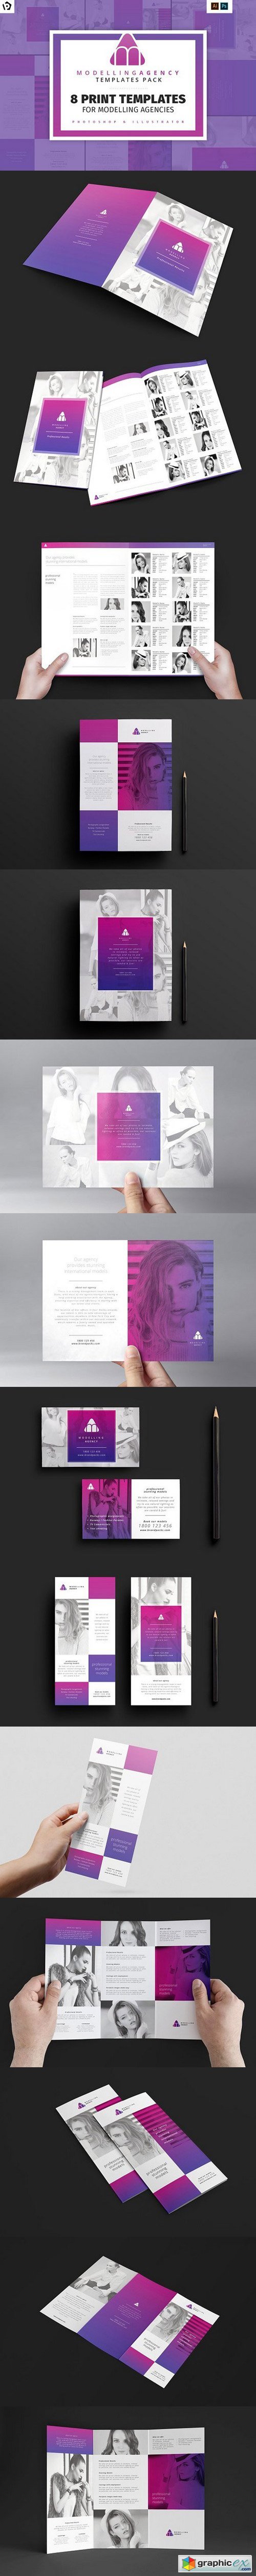 Modelling Agency Templates Pack